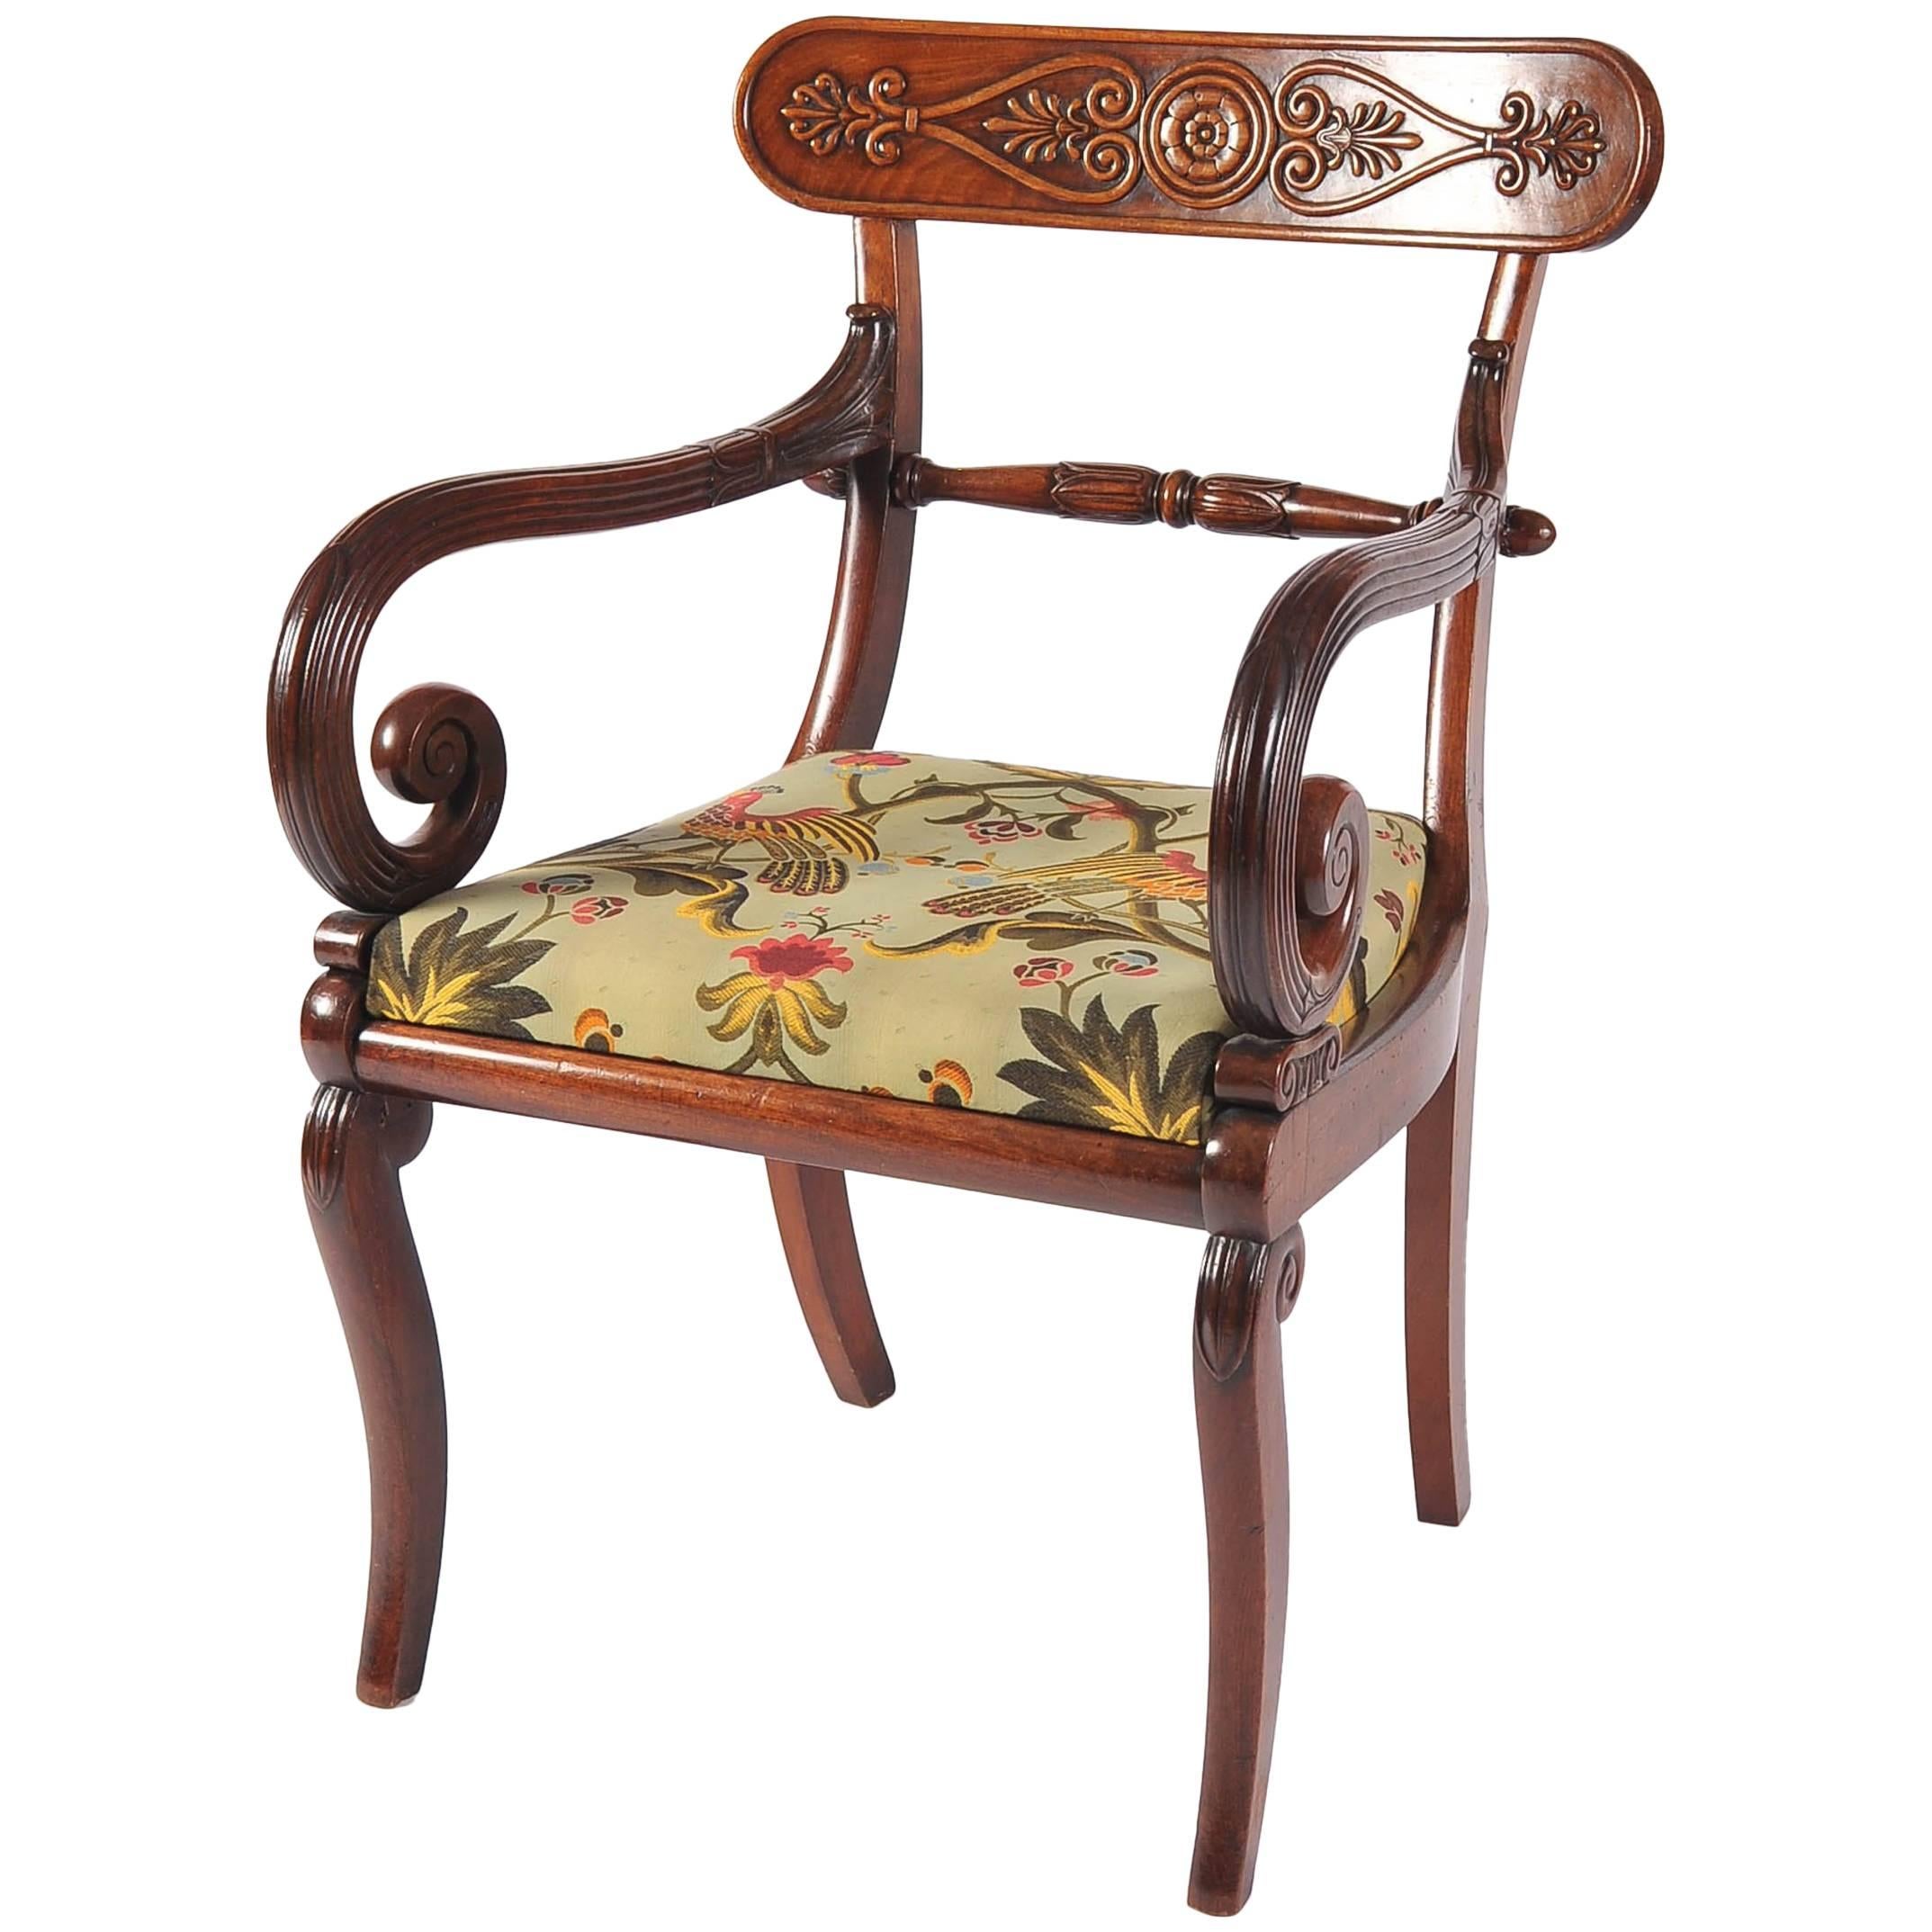 Mahogany Desk Chair, French Empire Period, Cabriole Legs, Early 19th Century For Sale